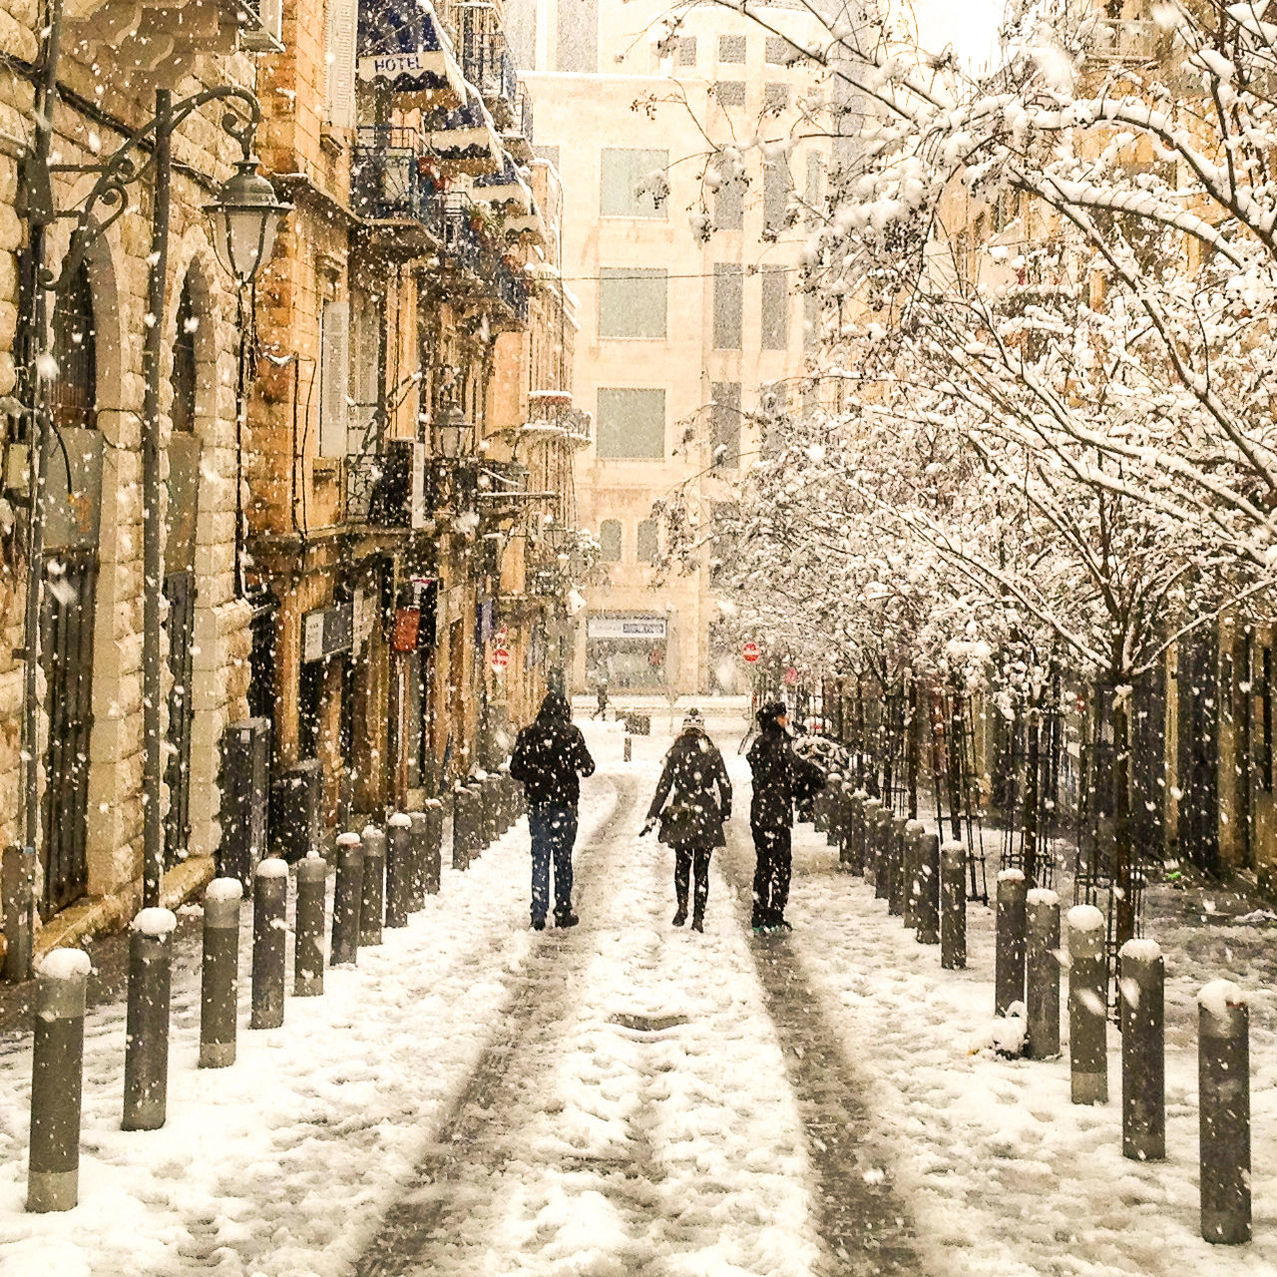 People walking on snow covered city